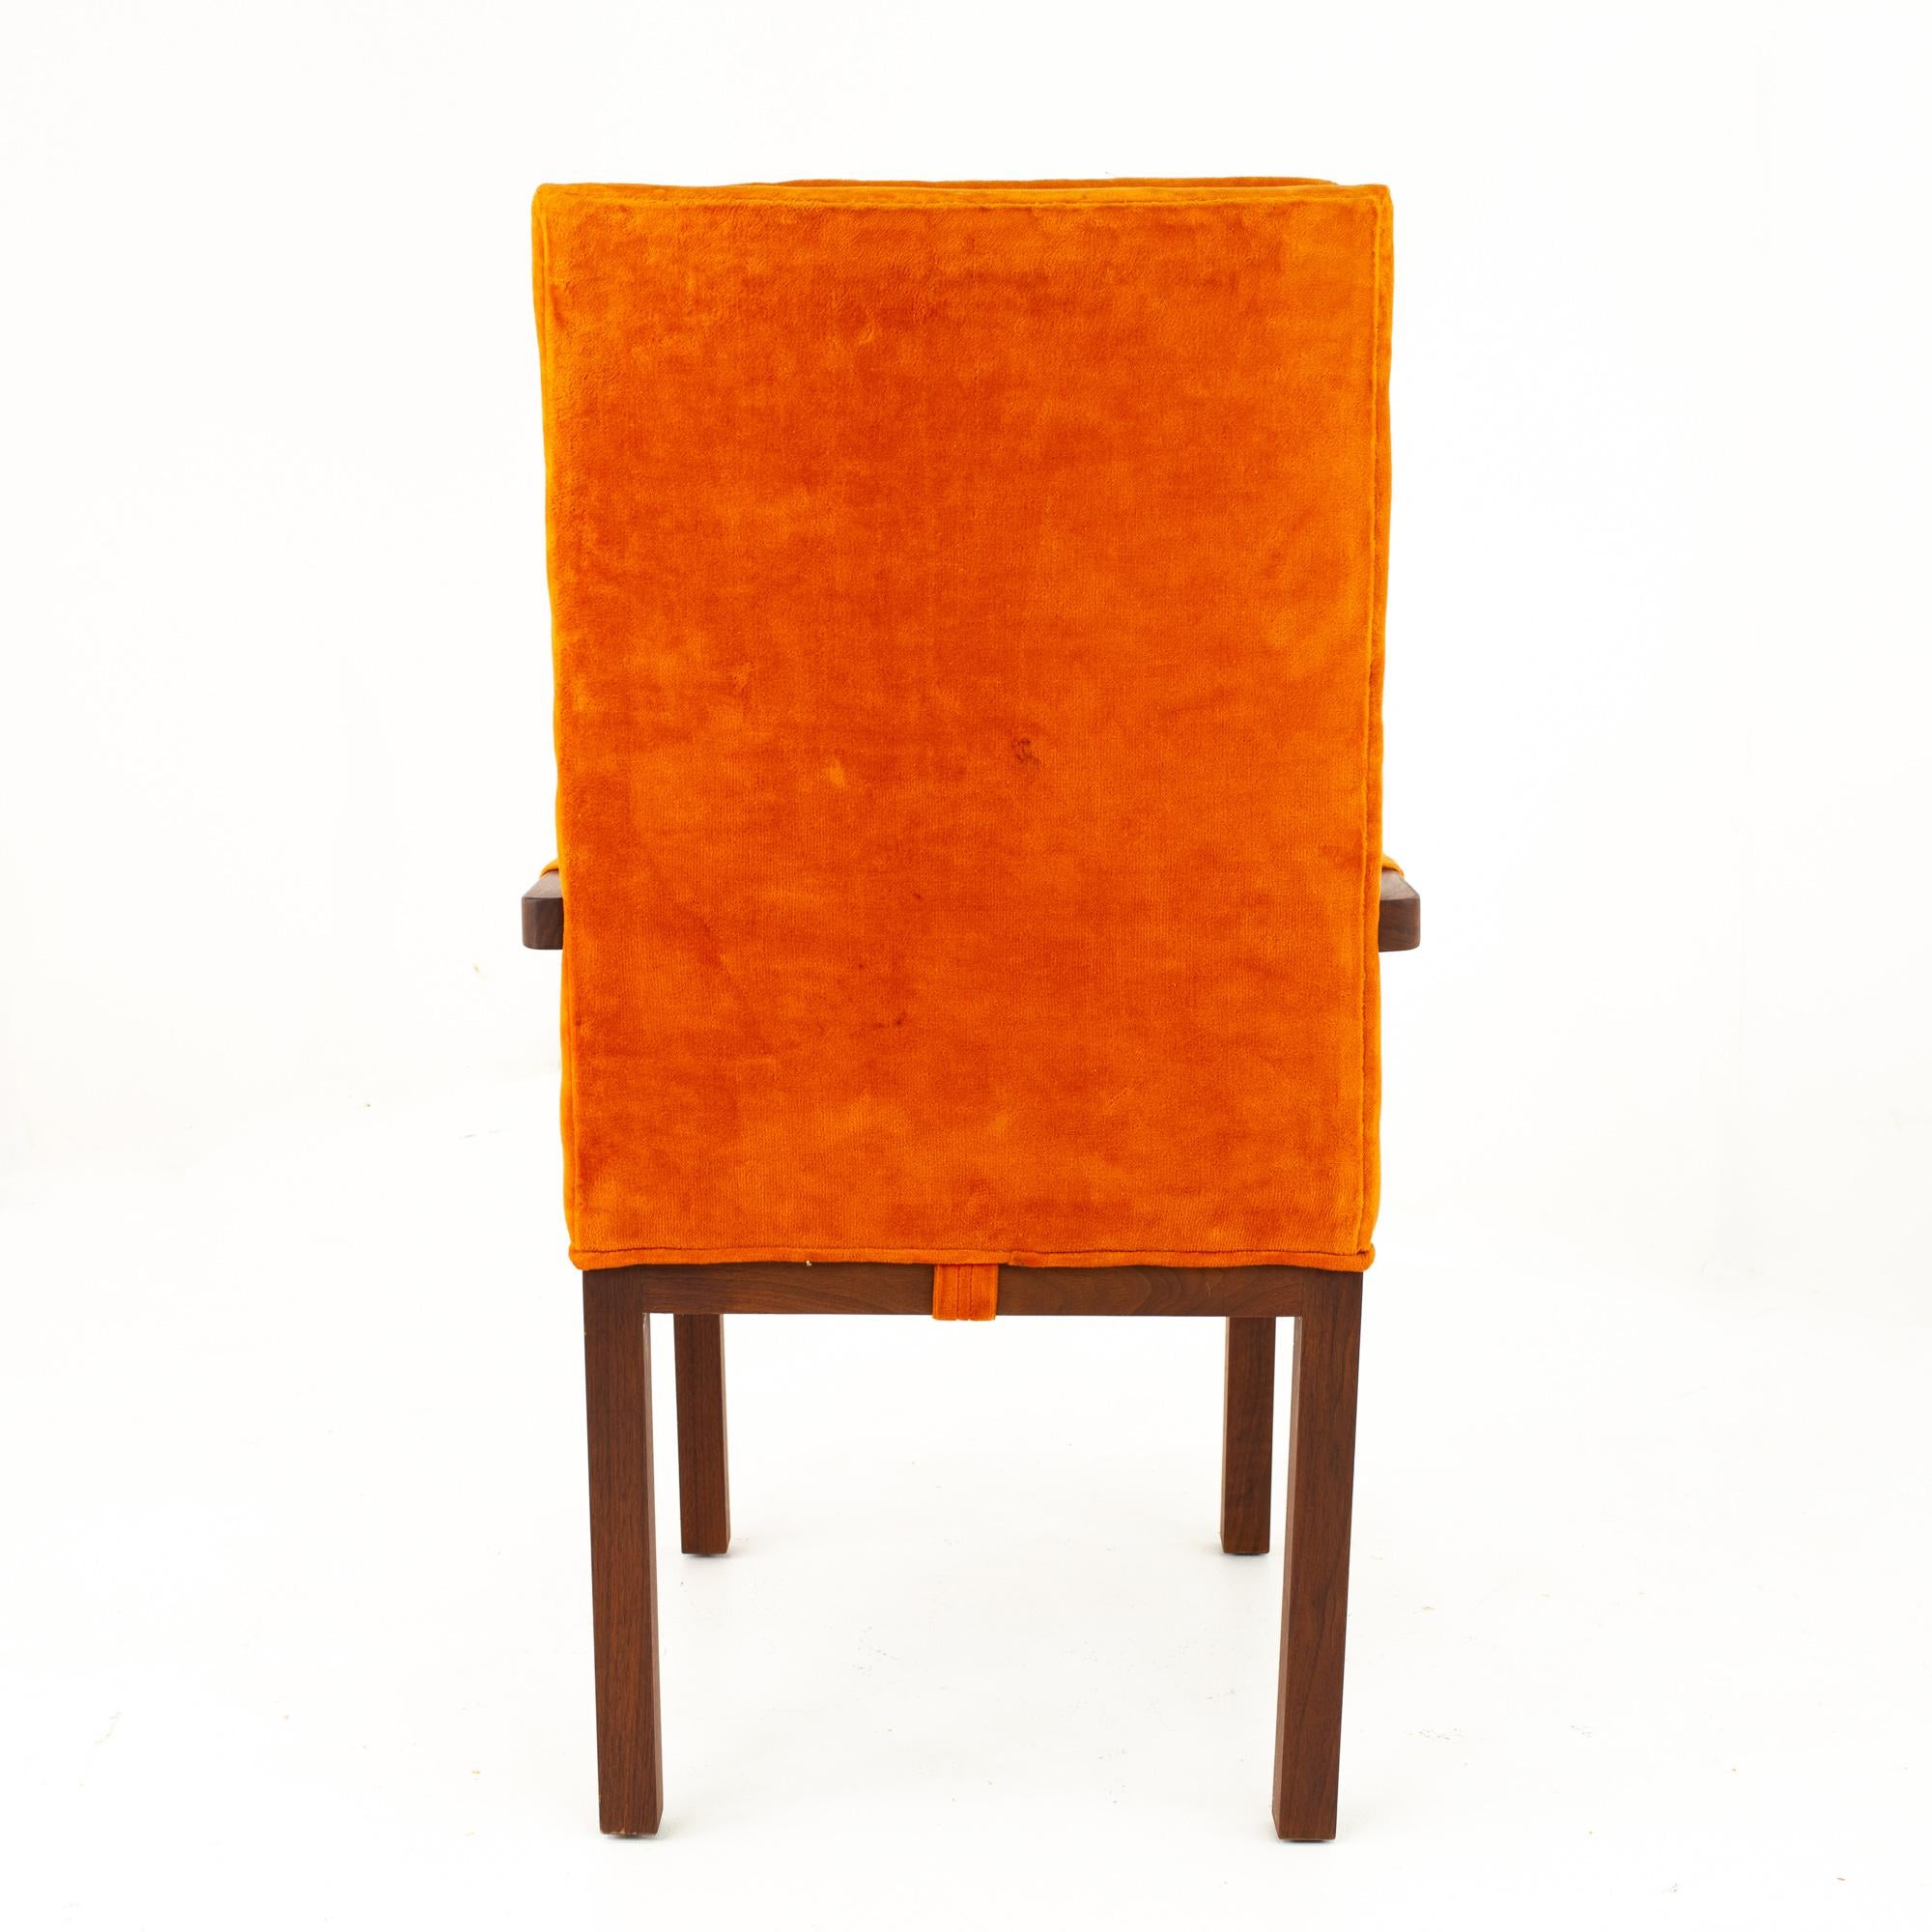 Milo Baughman Style Dillingham Orange and Walnut Upholstered Dining Chairs - Set 3